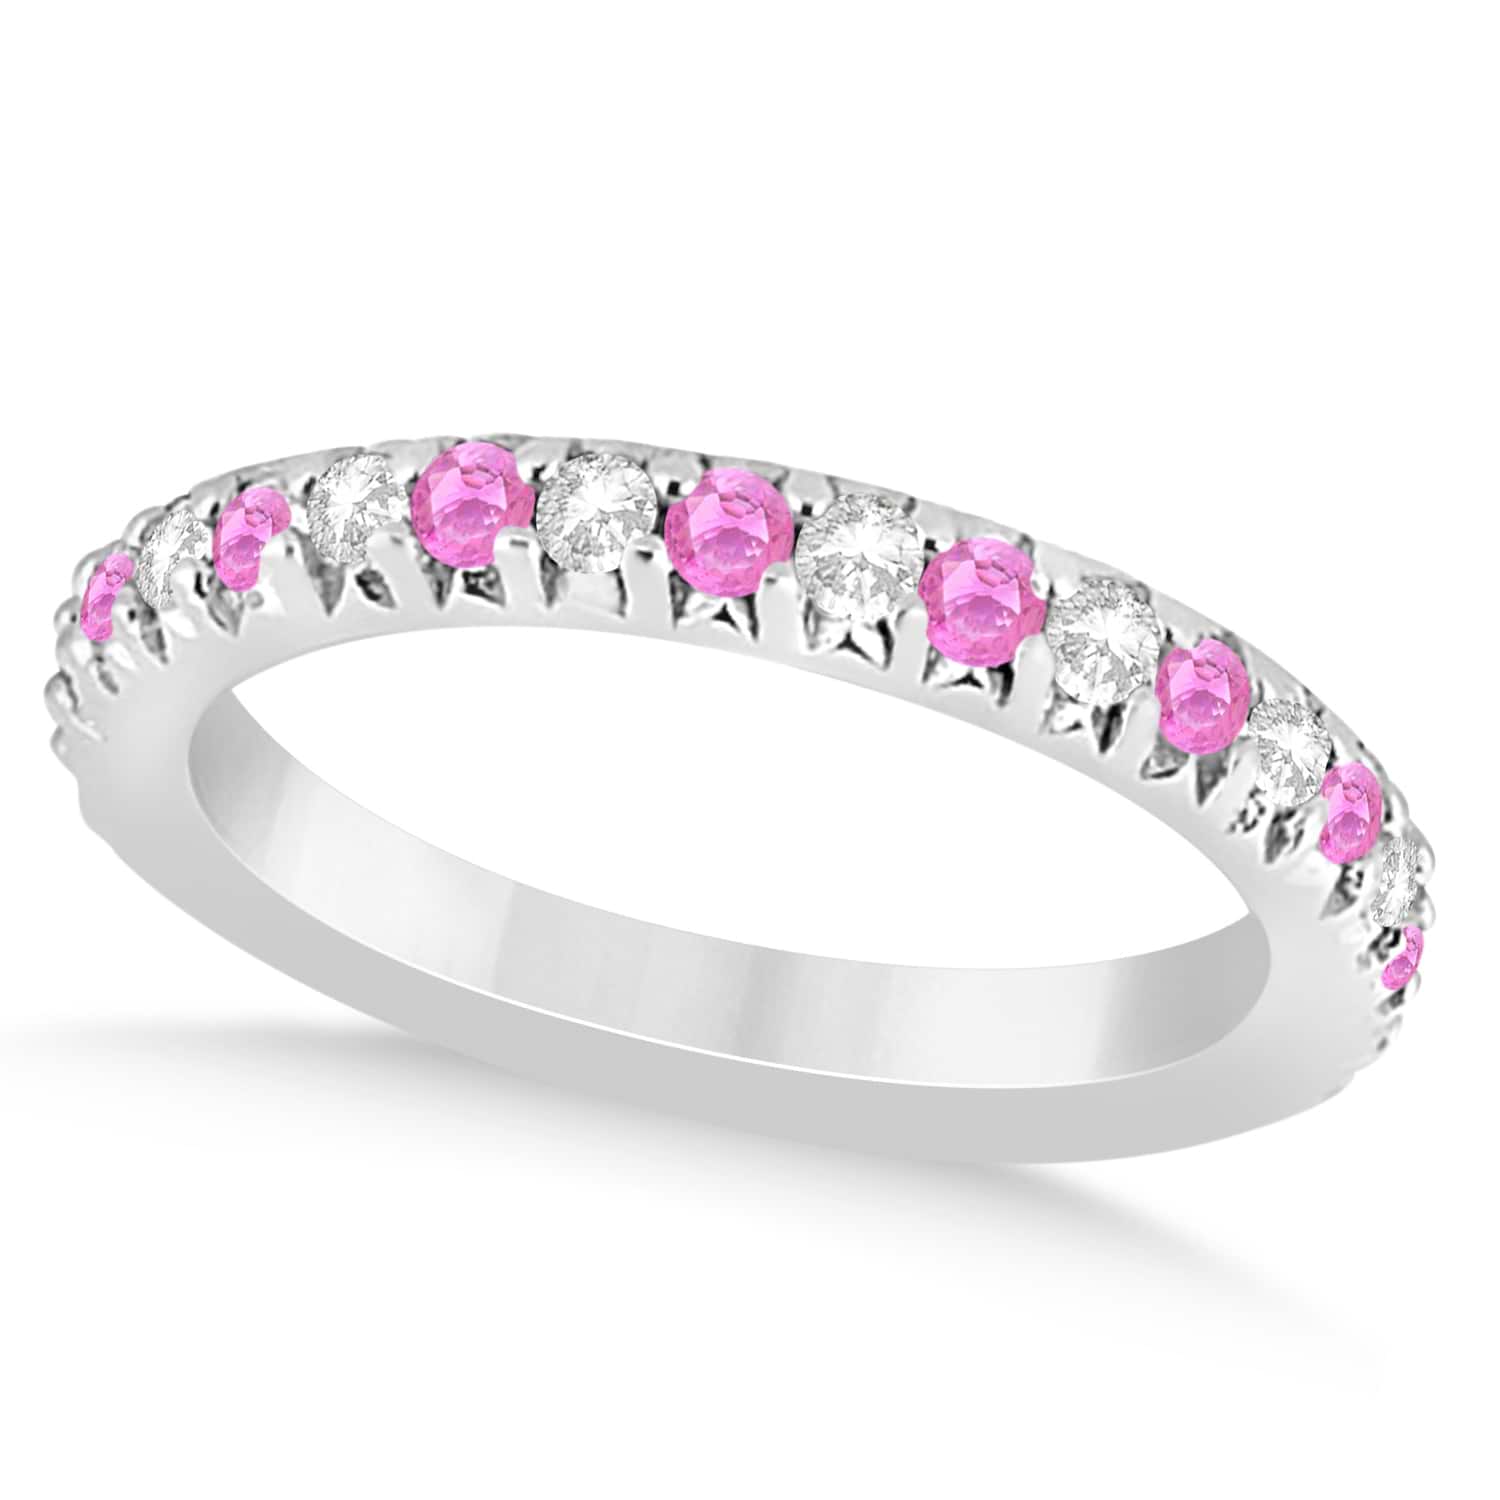 Pink Sapphire & Diamond Accented Wedding Band 18k White Gold 0.60ct